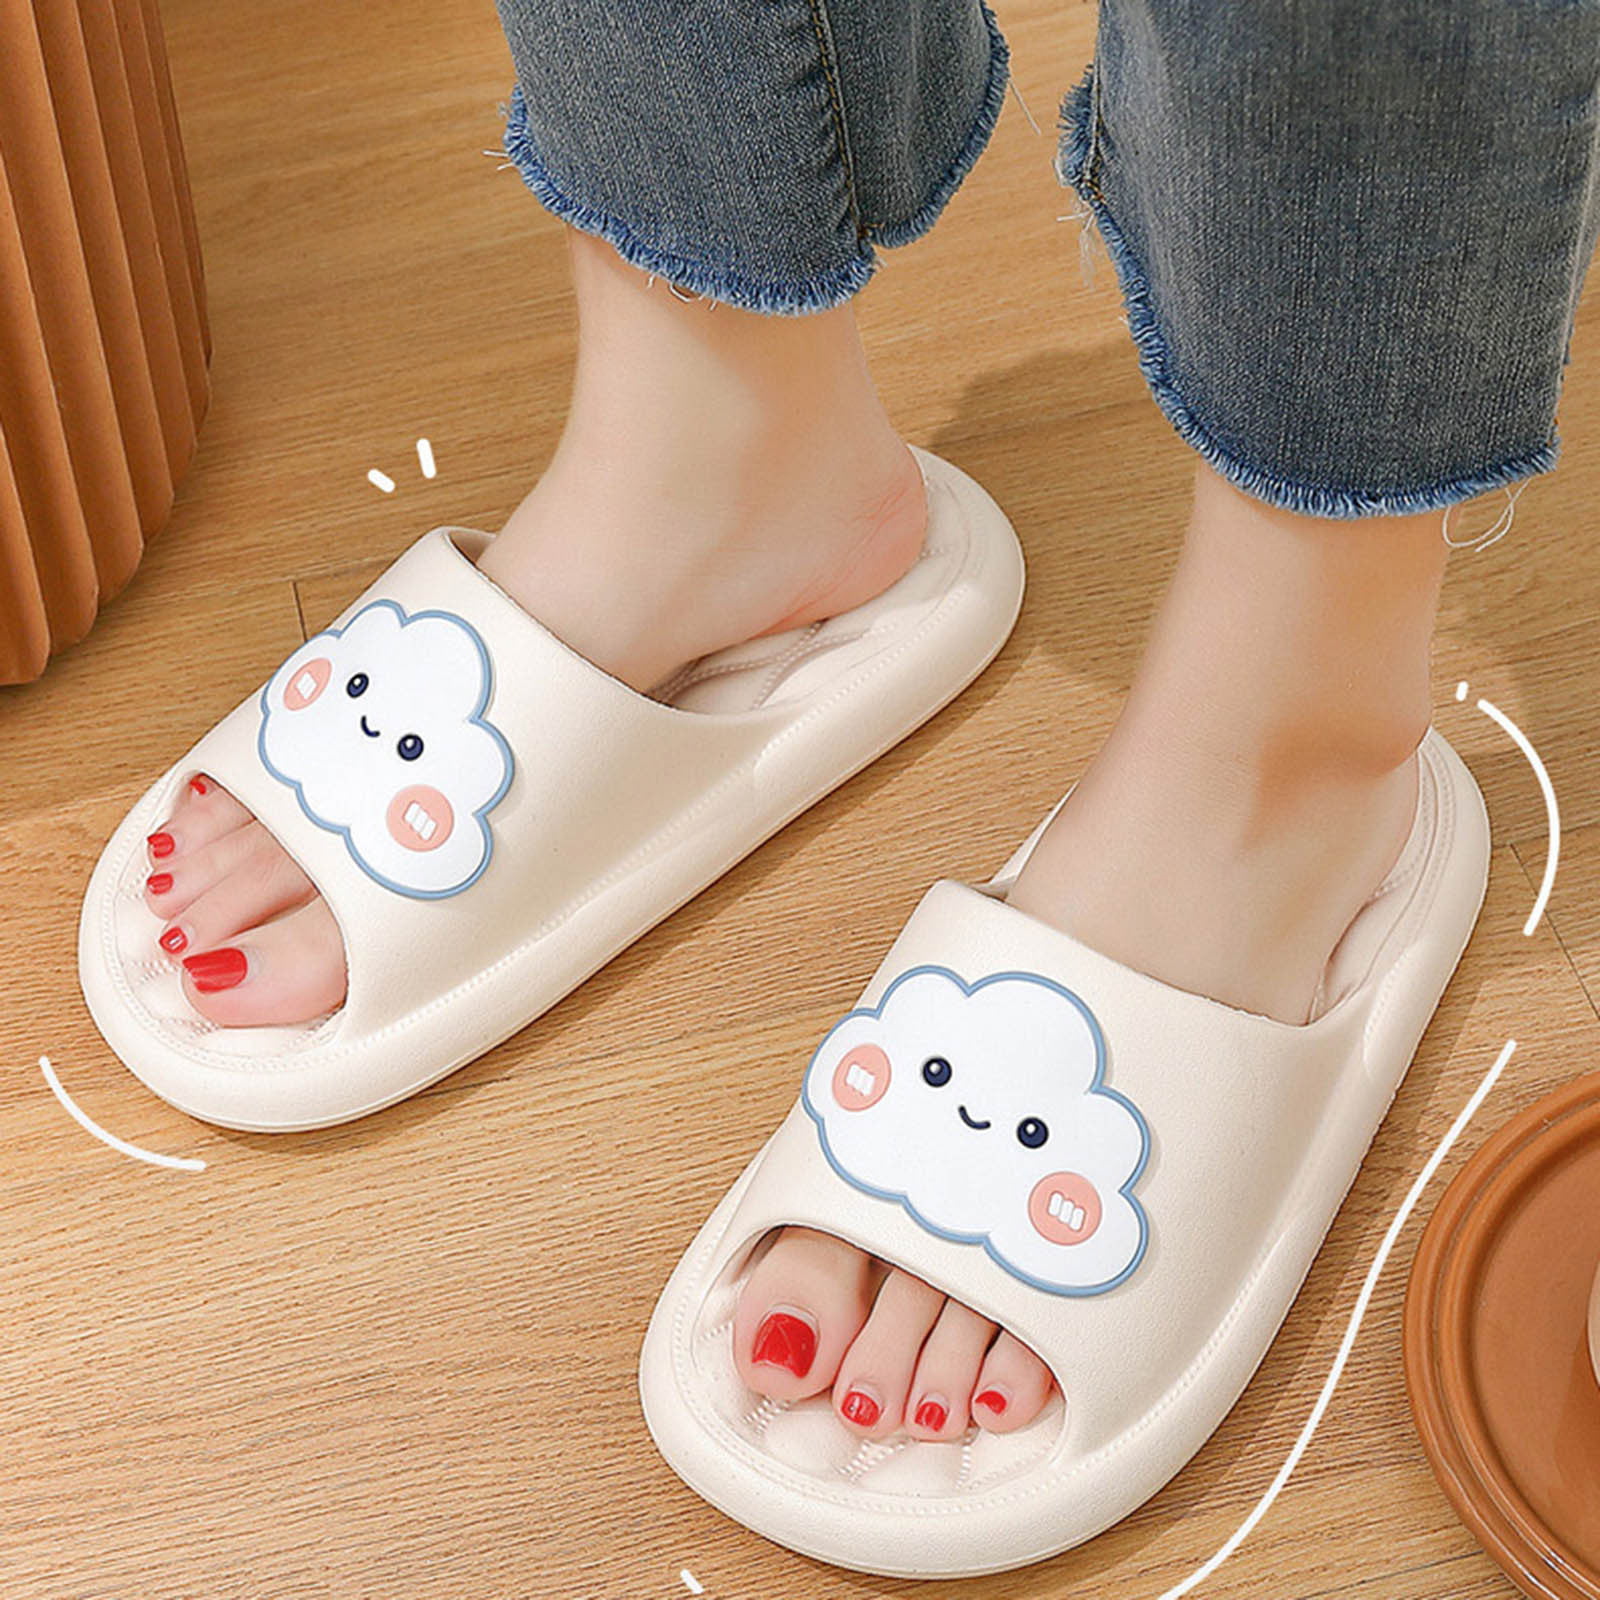 toon Zwijgend pit Cathalem Sparkly Slippers for Women Women Slippers Cartoon Cute Cloud Soft  Sole Comfortable Non Slip Hippo Slippers for Women White 7 - Walmart.com